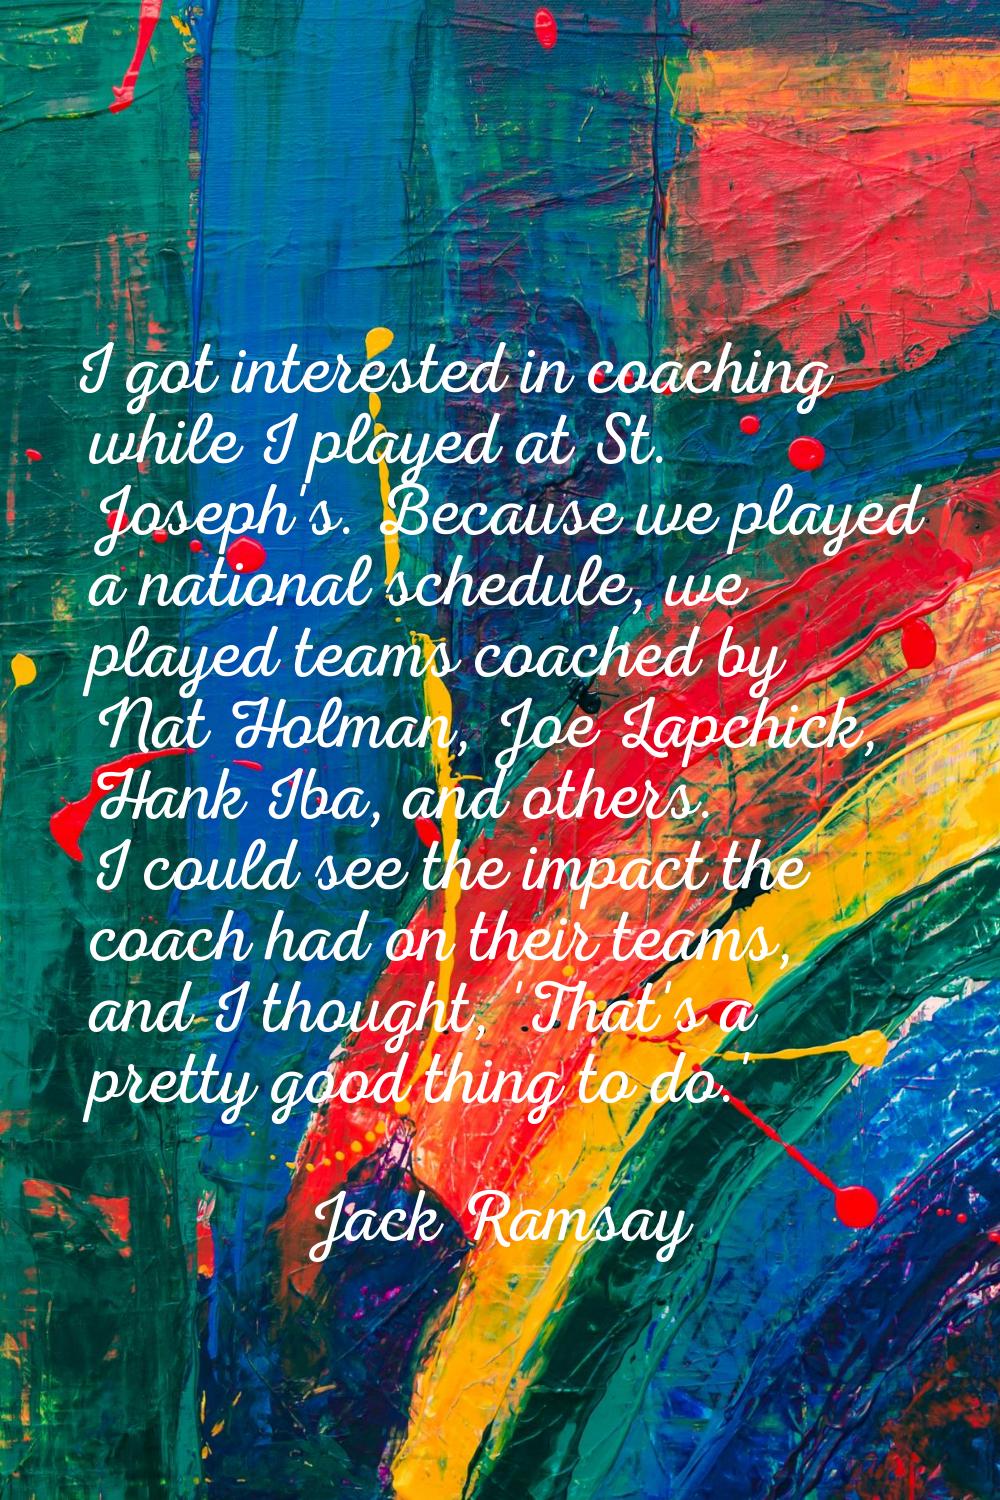 I got interested in coaching while I played at St. Joseph's. Because we played a national schedule,